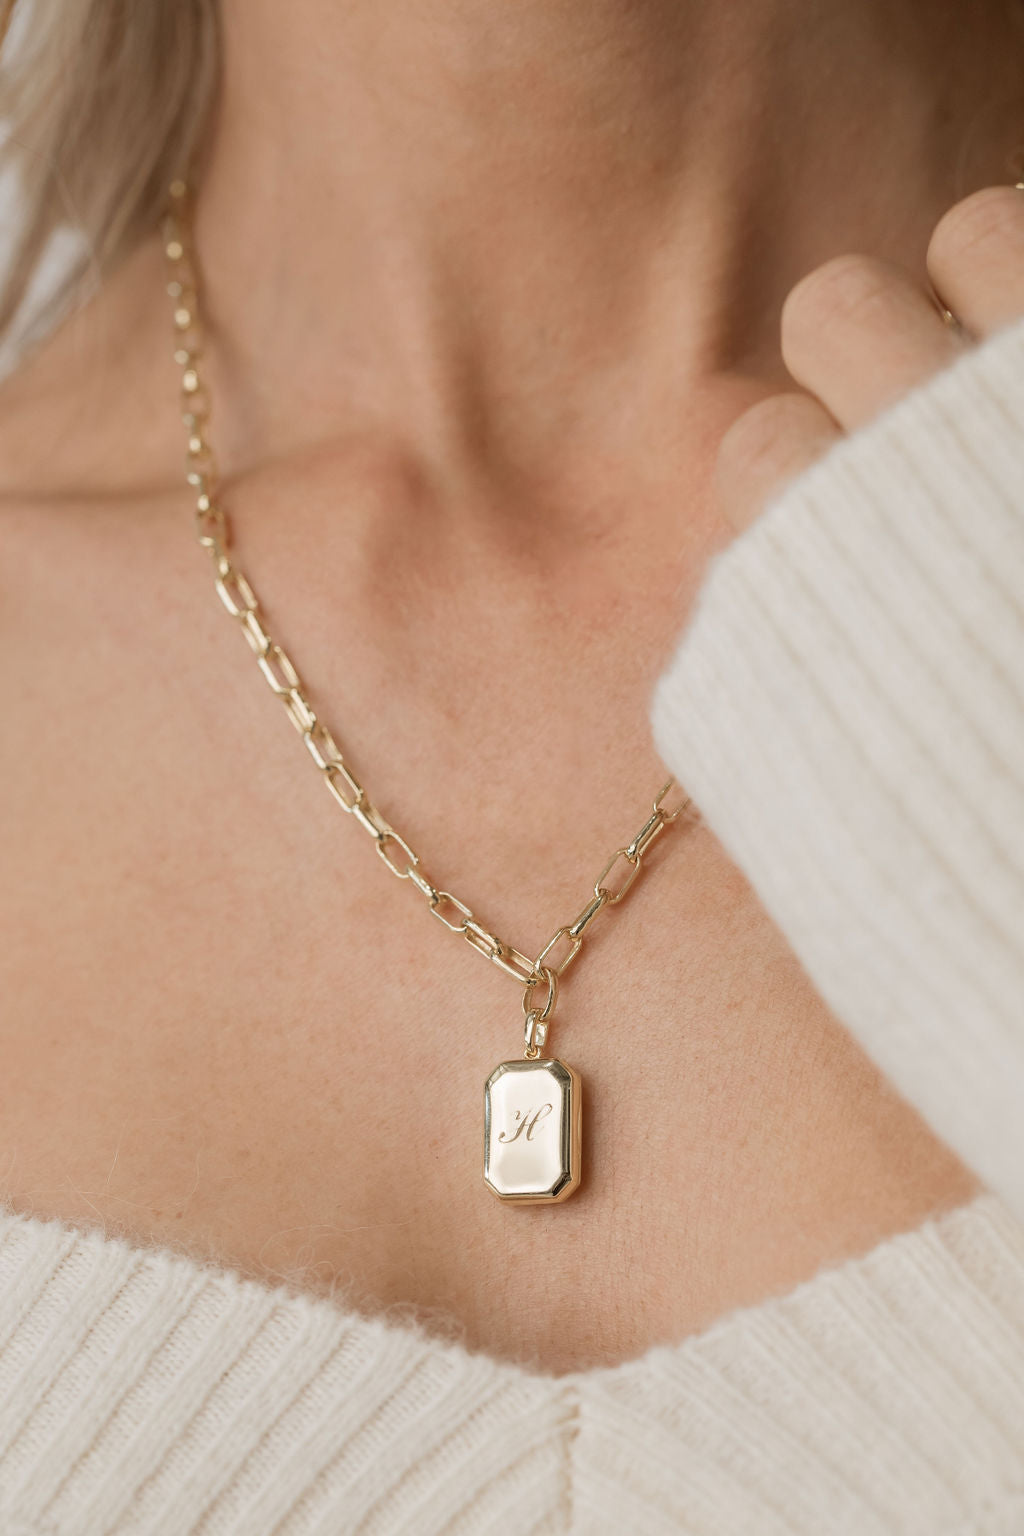 rectangular bevel locket engraved in gold with paperclip chain necklace